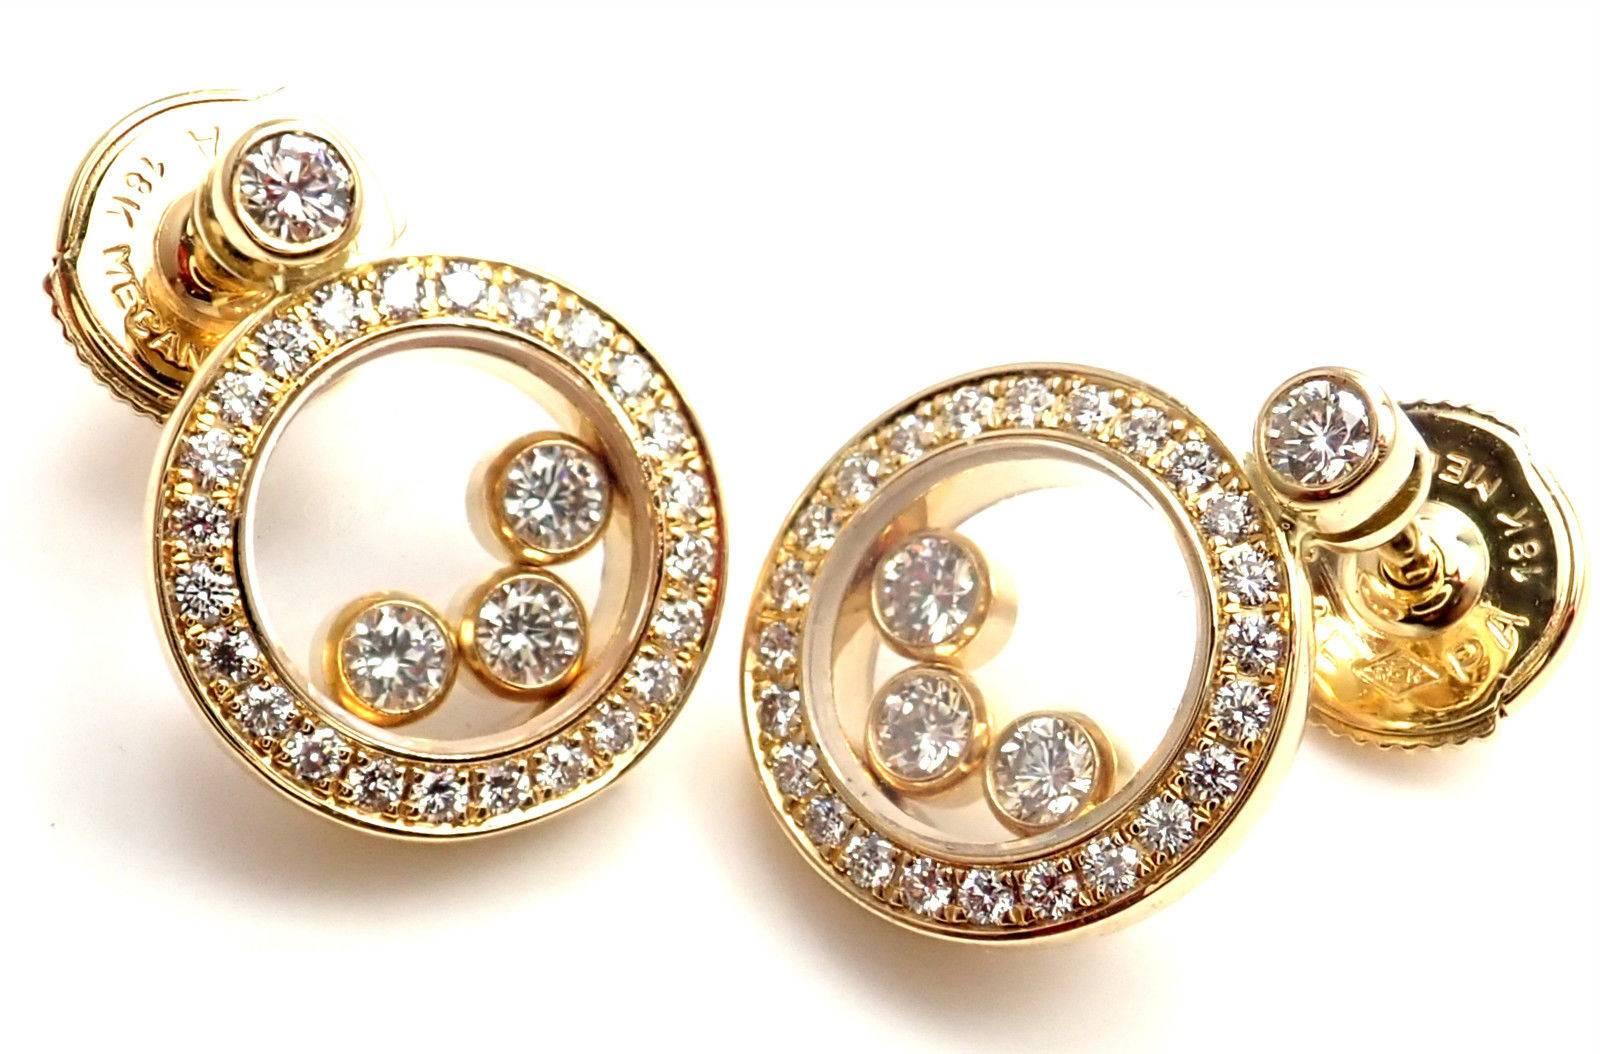 18k Yellow Gold Happy Diamond Round Earrings by Chopard.  
With 56 round brilliant cut diamond VS1 clarity, G color total weight .60ct
These earrings are for pierced ears.
Details:  
Measurements: 14mm x 11mm
Weight: 6.8 grams 
Stamped Hallmarks: